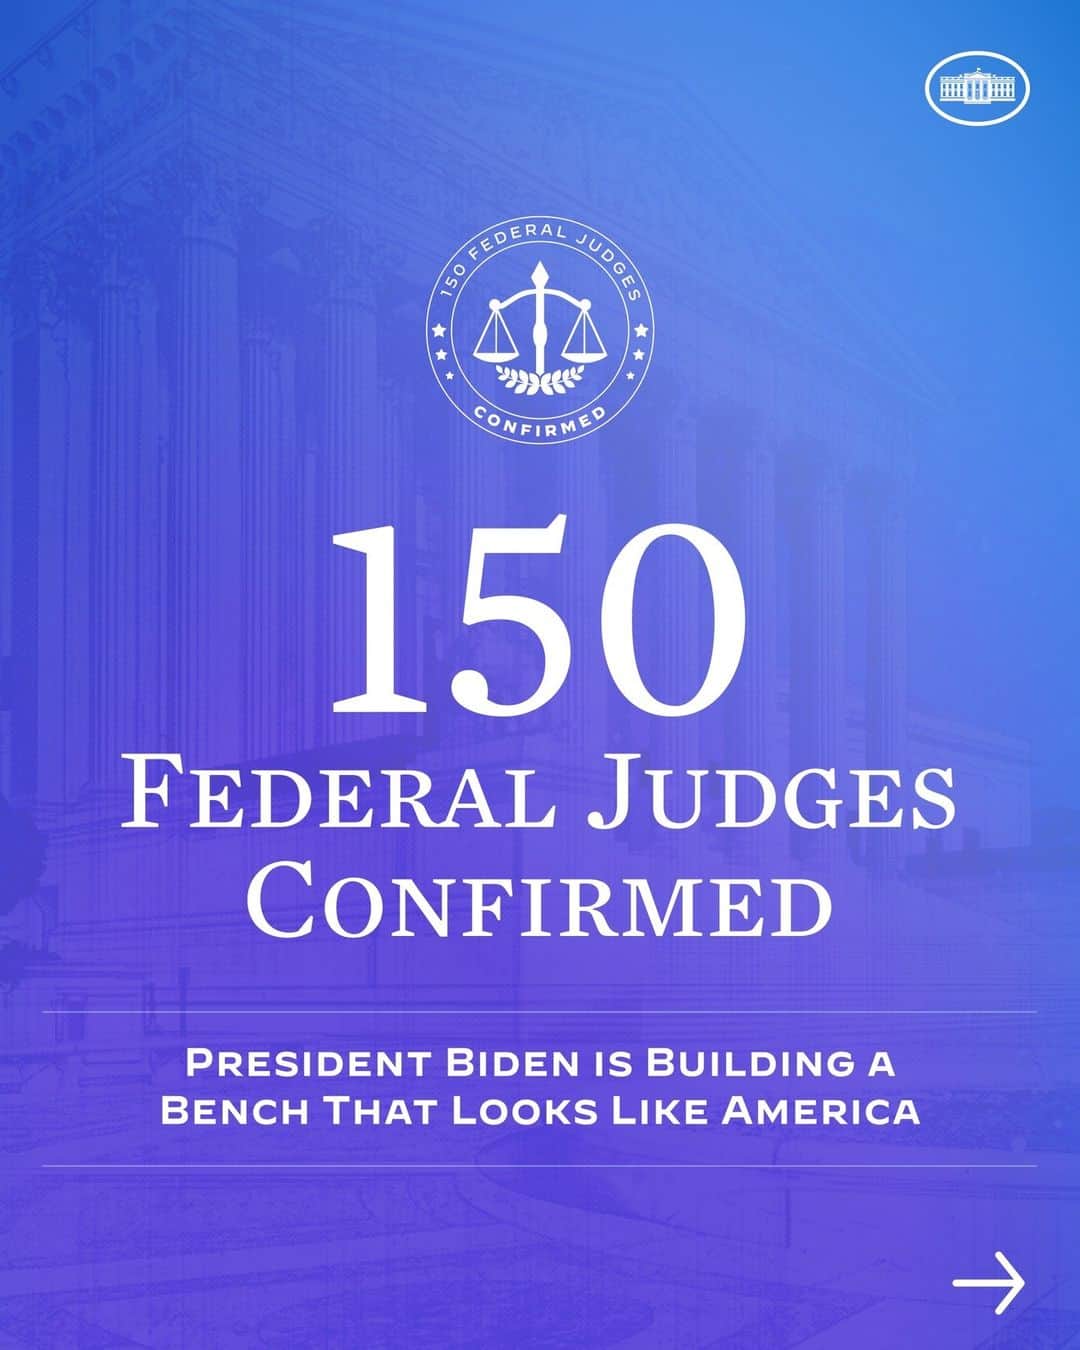 The White Houseのインスタグラム：「NEW: Last night, President Biden reached a major milestone of 150 confirmed federal judges.  These judges come from diverse professional backgrounds that have been underrepresented on the bench for far too long.  Here are a few additional ways these highly qualified jurists are making history.」